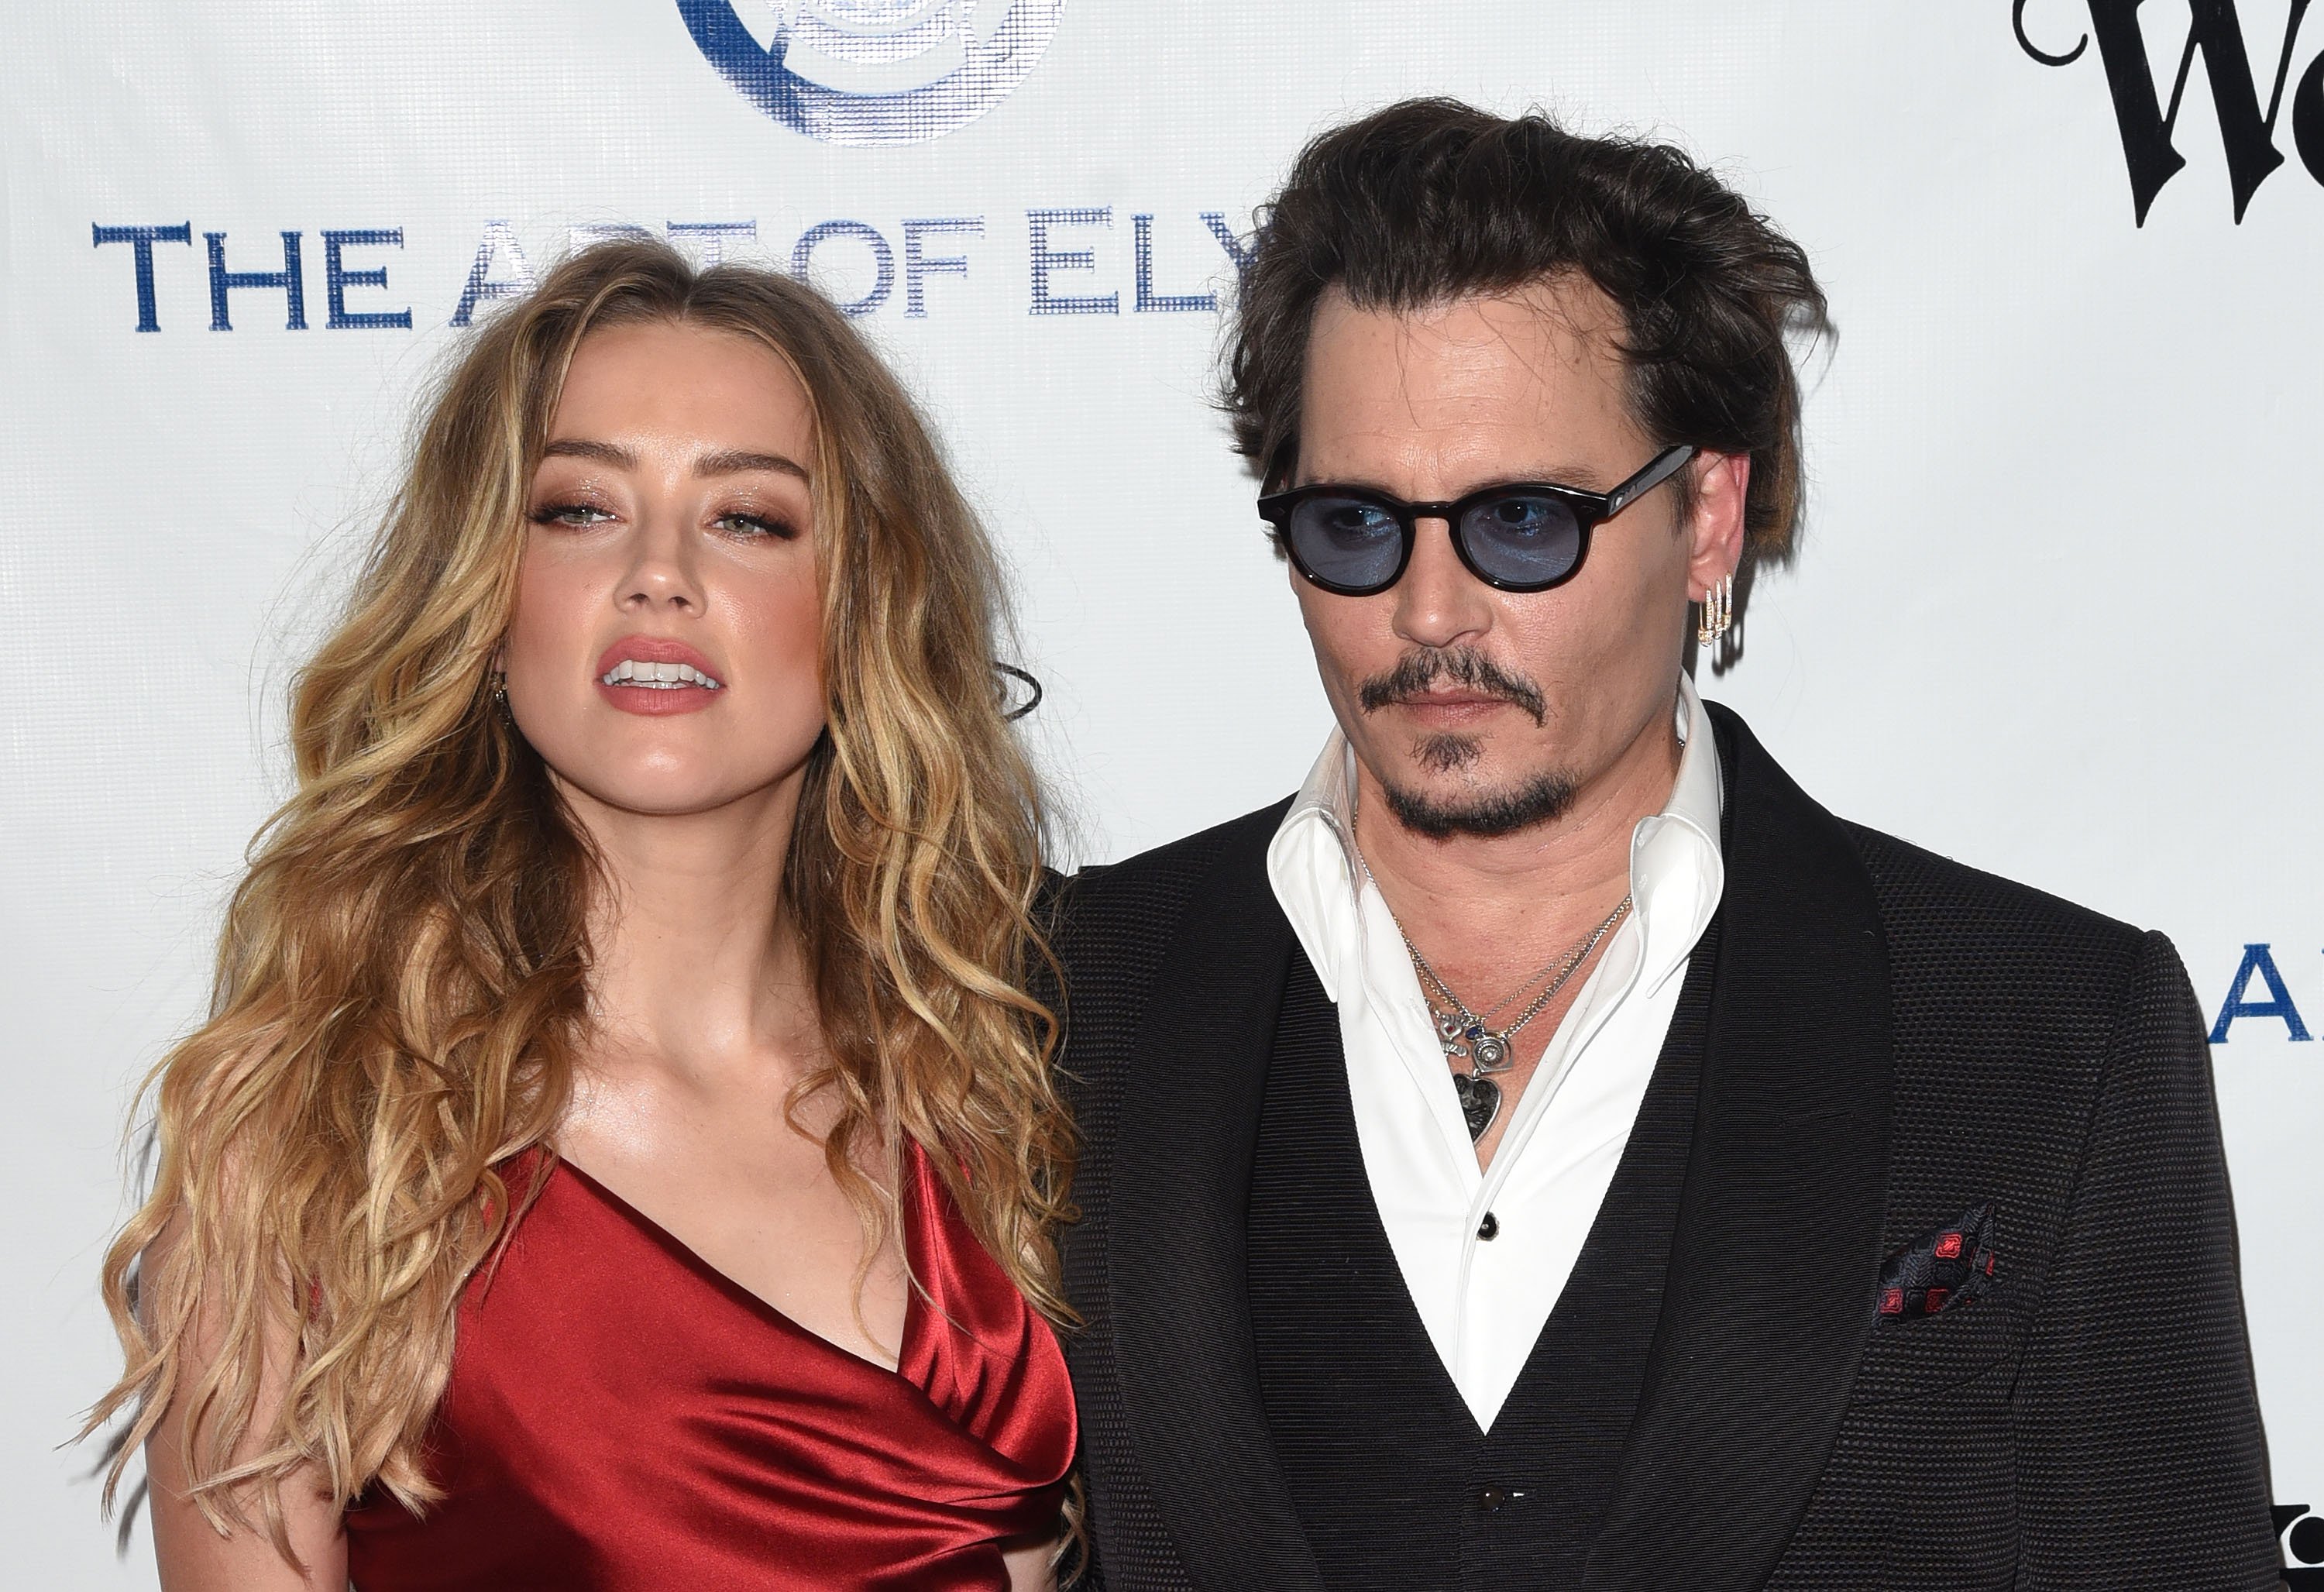 Amber Heard and Johnny Depp, who celebrity chef Leon Rothera cooked for, smiling on the carpet at The Art of Elysium 2016 HEAVEN Gala